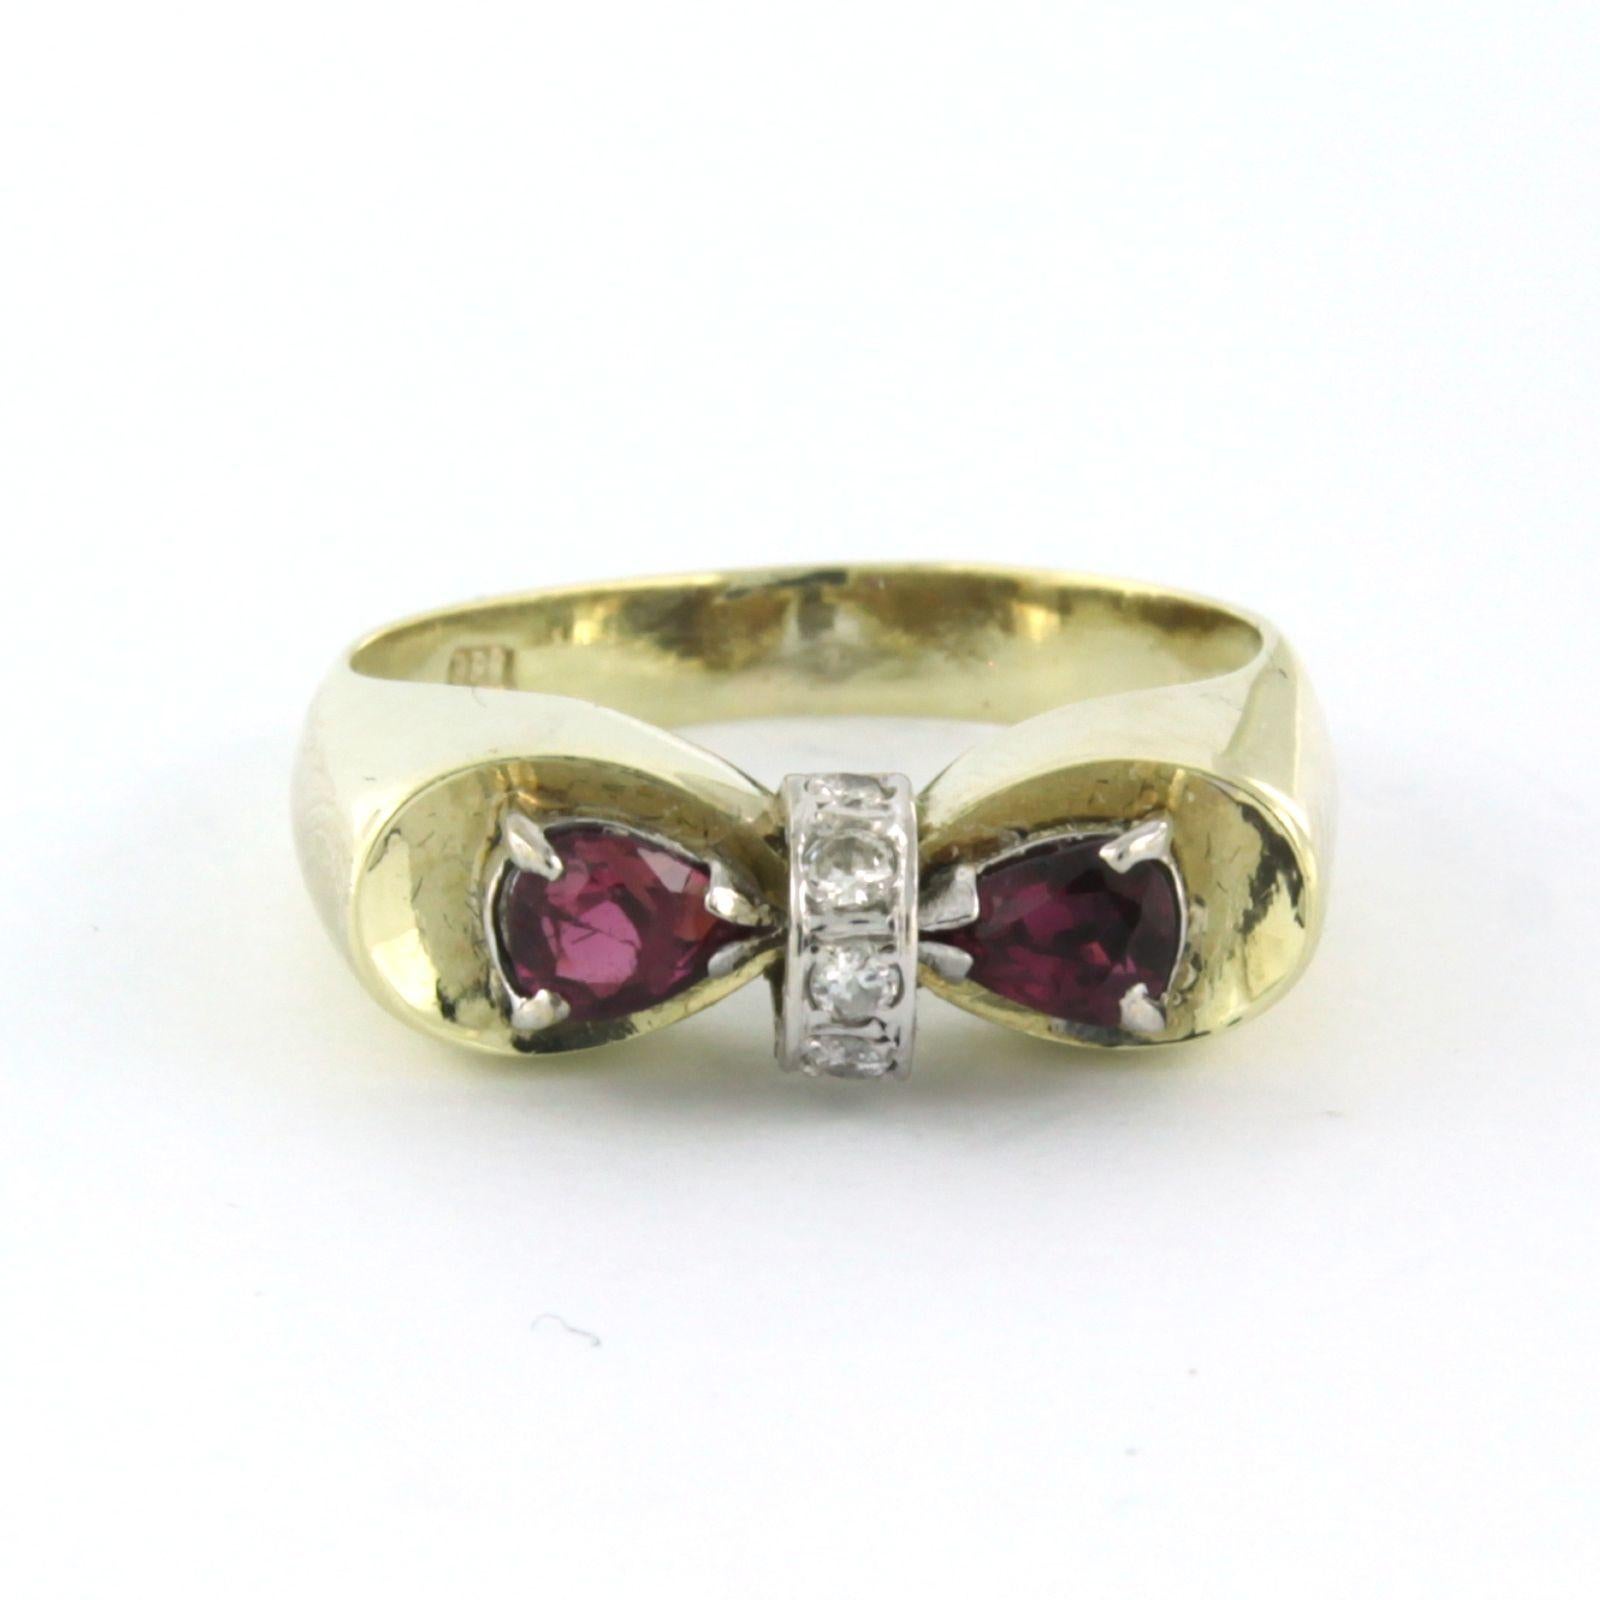 14 kt bicolour gold ring set with ruby ​​and brilliant cut diamonds. 0.10 ct - F/G - SI - ring size U.S. 7 - EU. 17.25(54)

detailed description:

the top of the ring is 6.2 mm wide

weight 5.0 grams

ring size U.S. 7 - EU. 17.25(54), ring can be